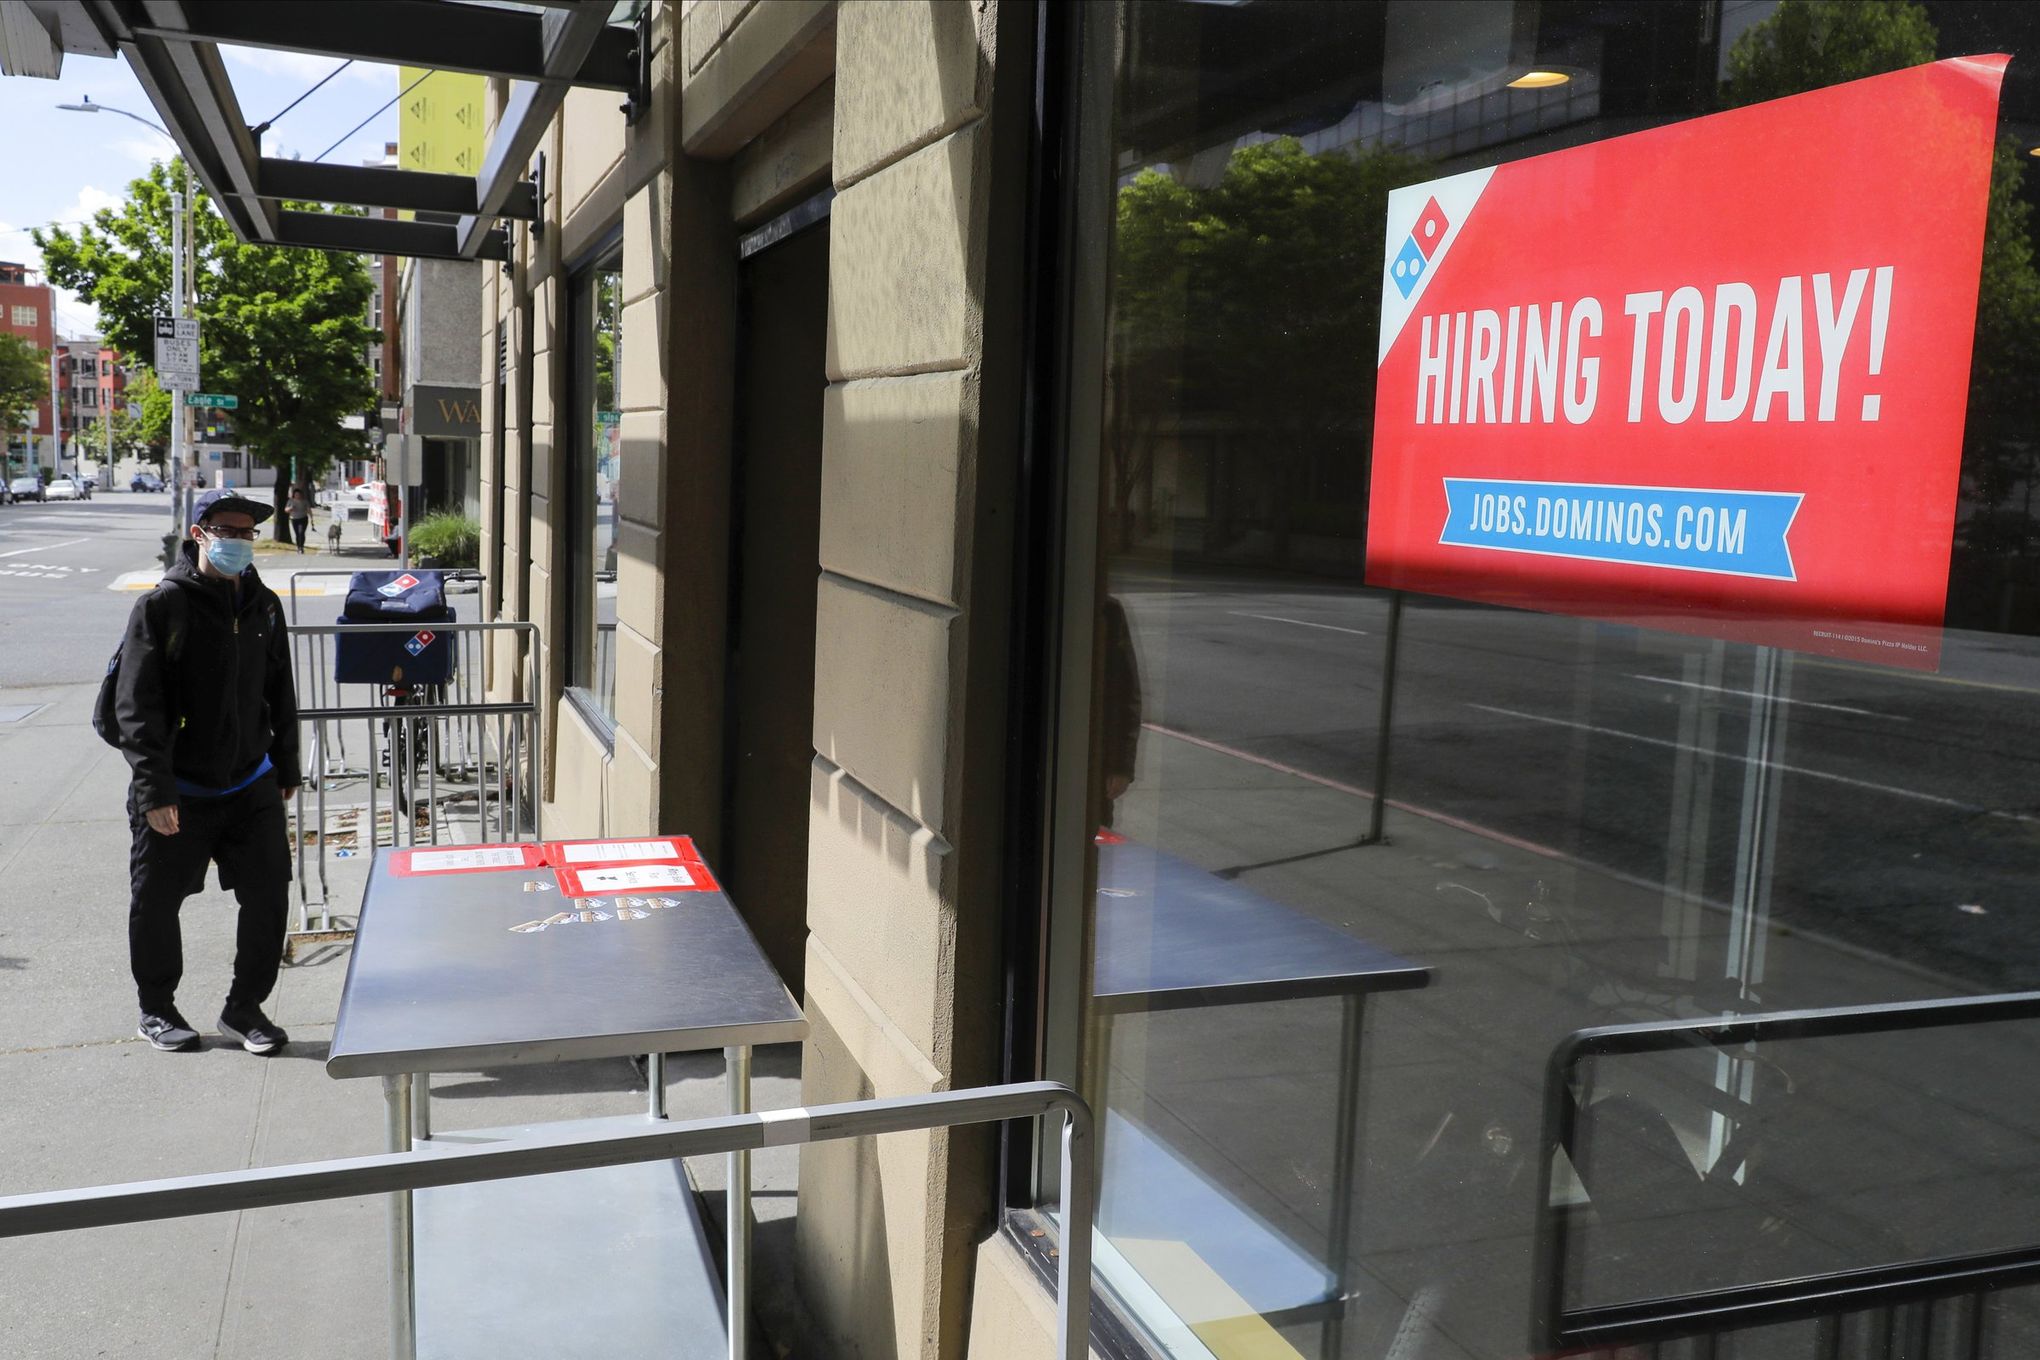 A sign that reads “Hiring Today!” is posted in the window of a Domino’s Pizza store in downtown Seattle.